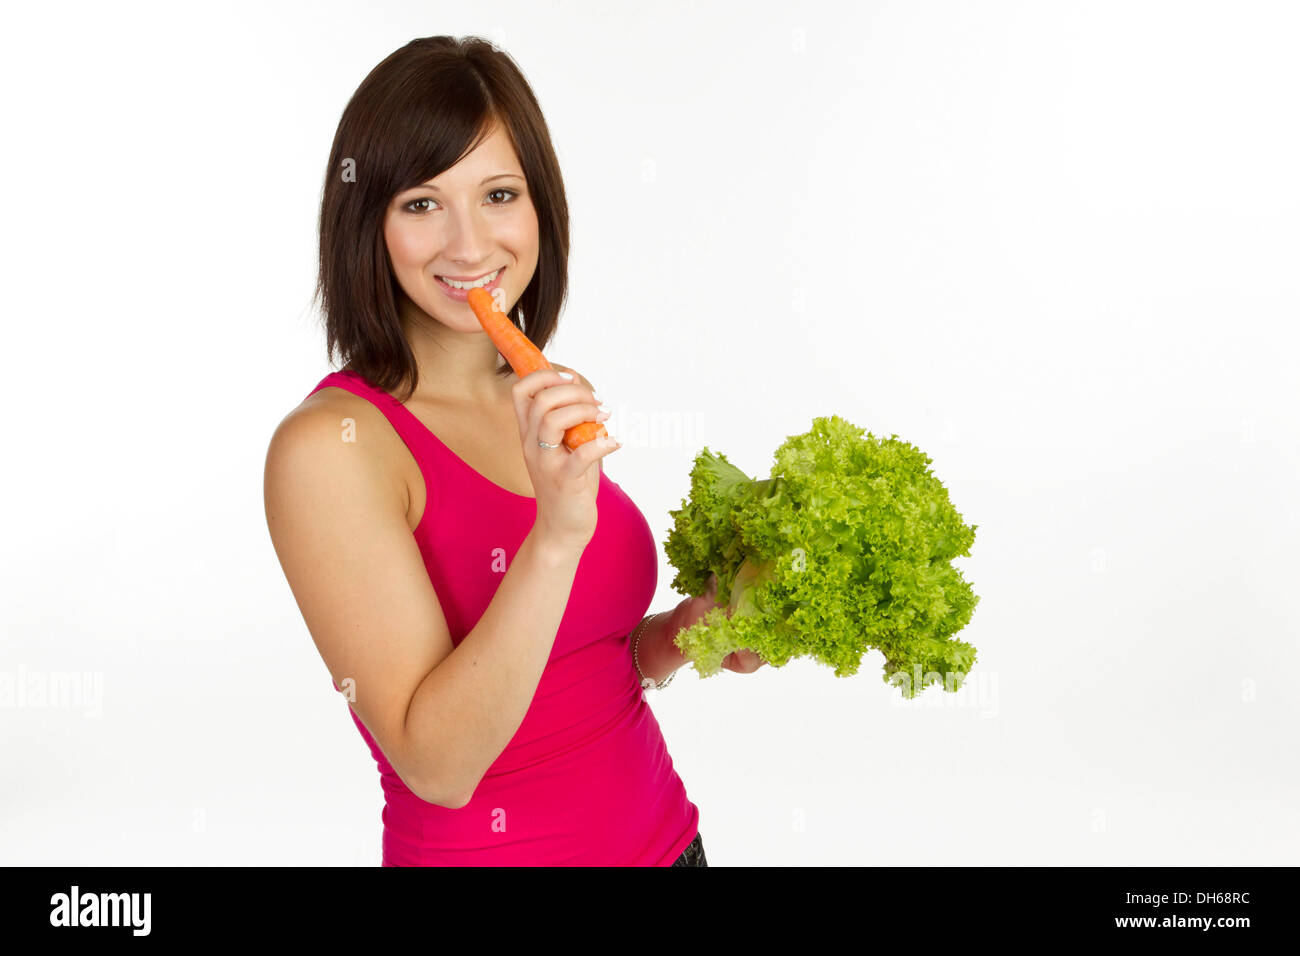 Young woman with carrot and lettuce Stock Photo